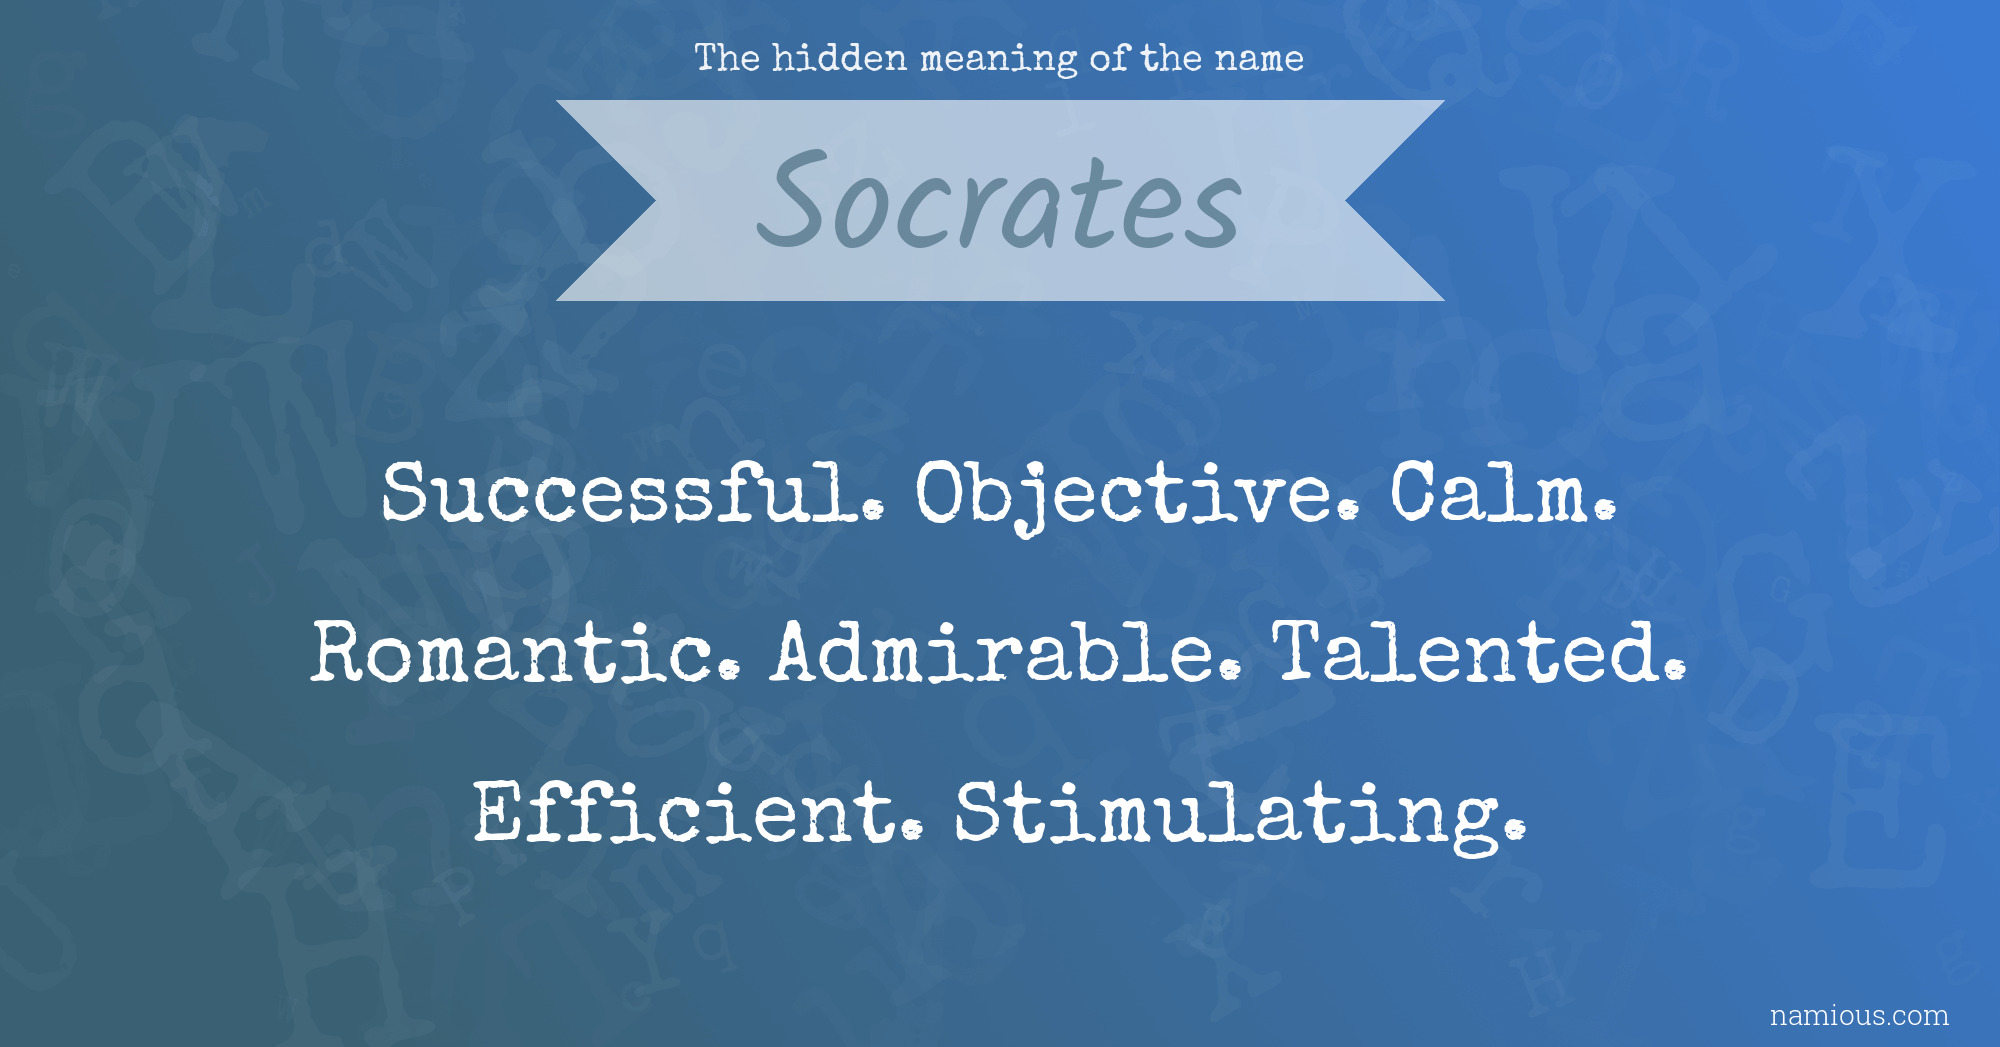 The hidden meaning of the name Socrates | Namious